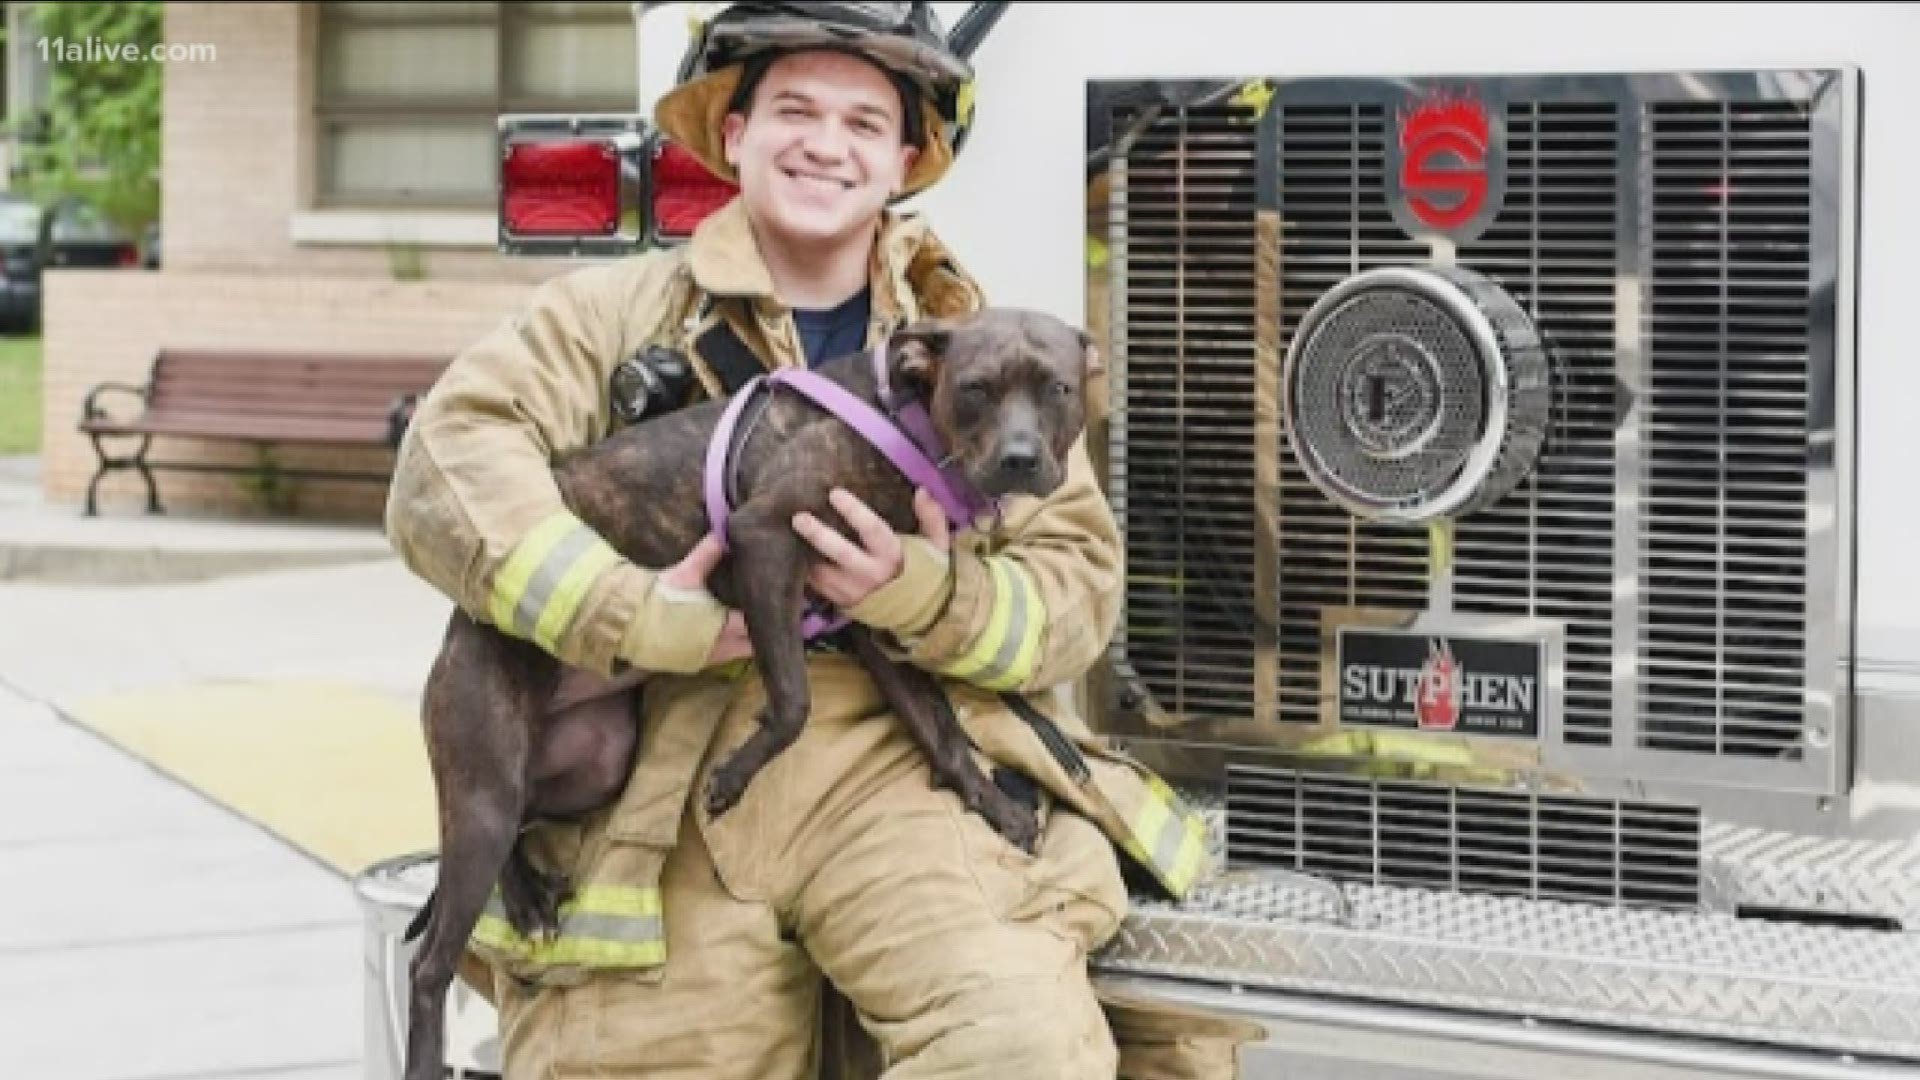 The Decatur Fire Station is teaming up with the Lifeline Animal Project to help find homeless dogs their forever homes.